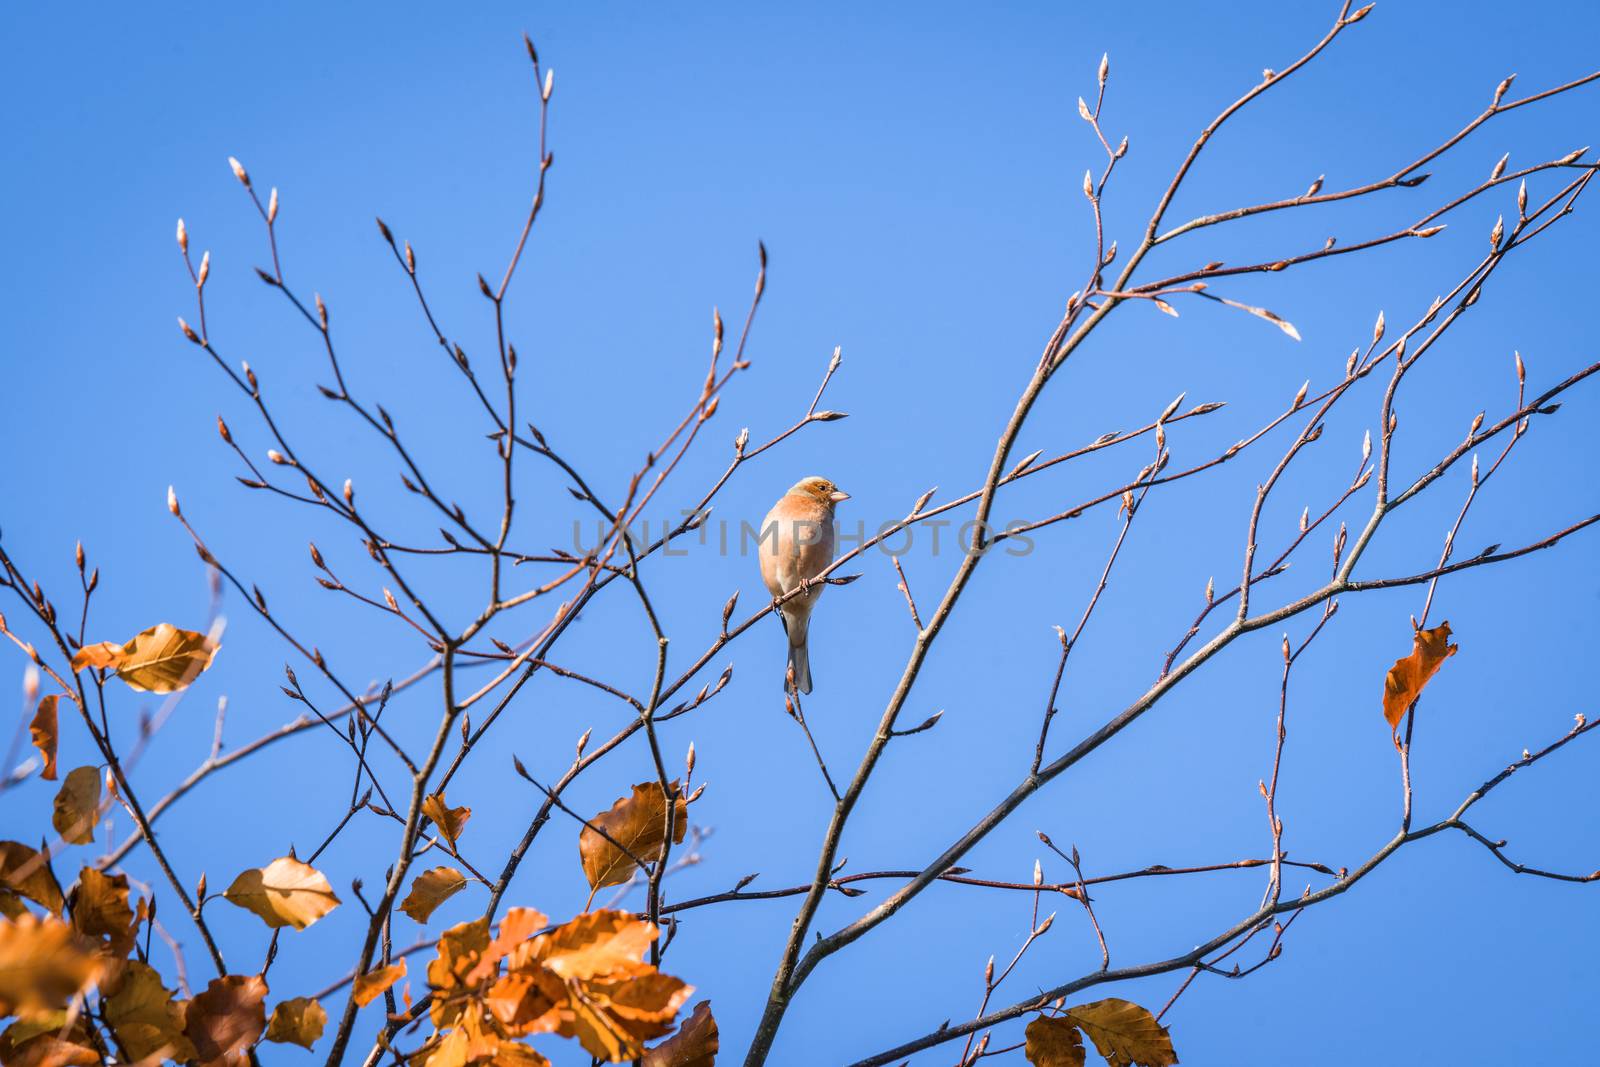 Single finch in a tree top in the fall by Sportactive